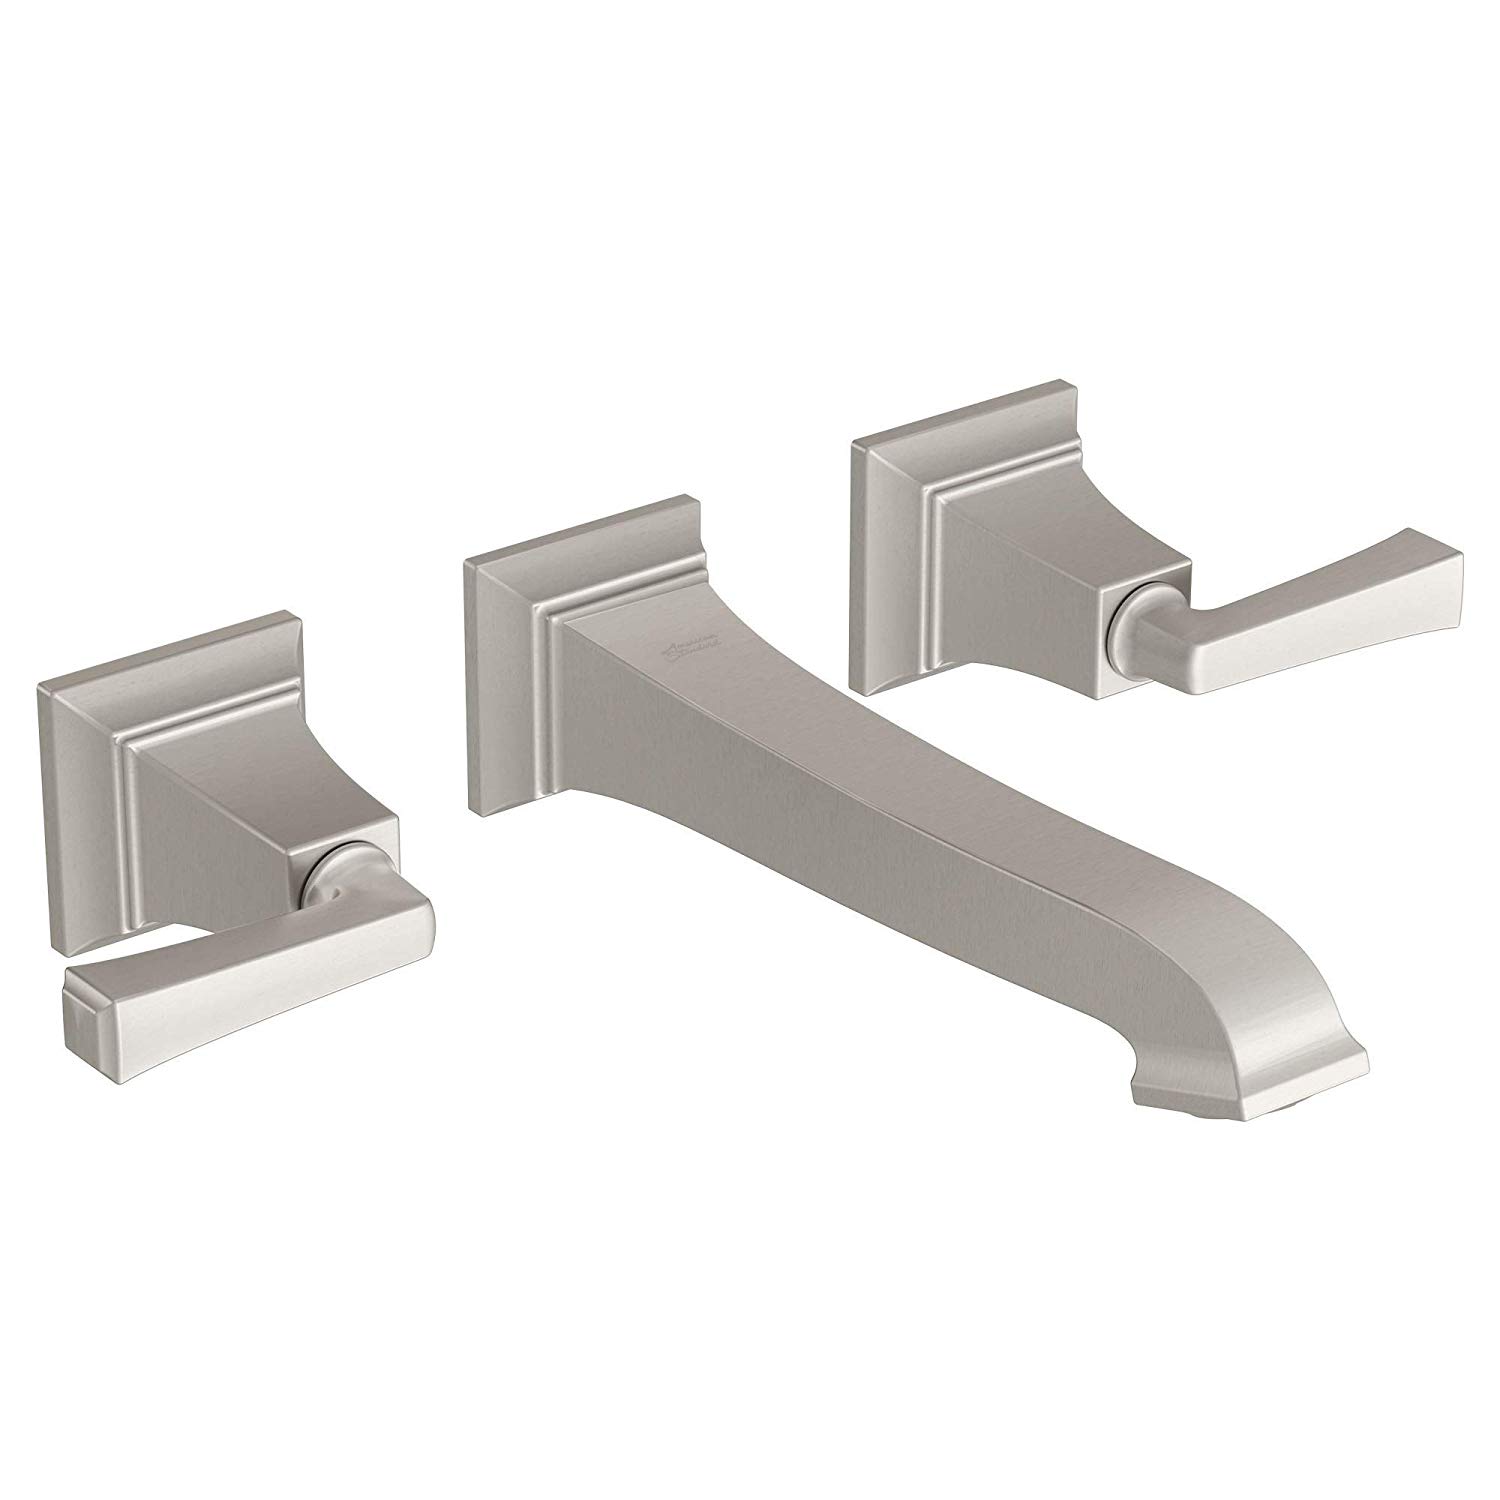 Town Square S Wall Mount Lav Faucet W/Lever Handles In Brushed Nickel